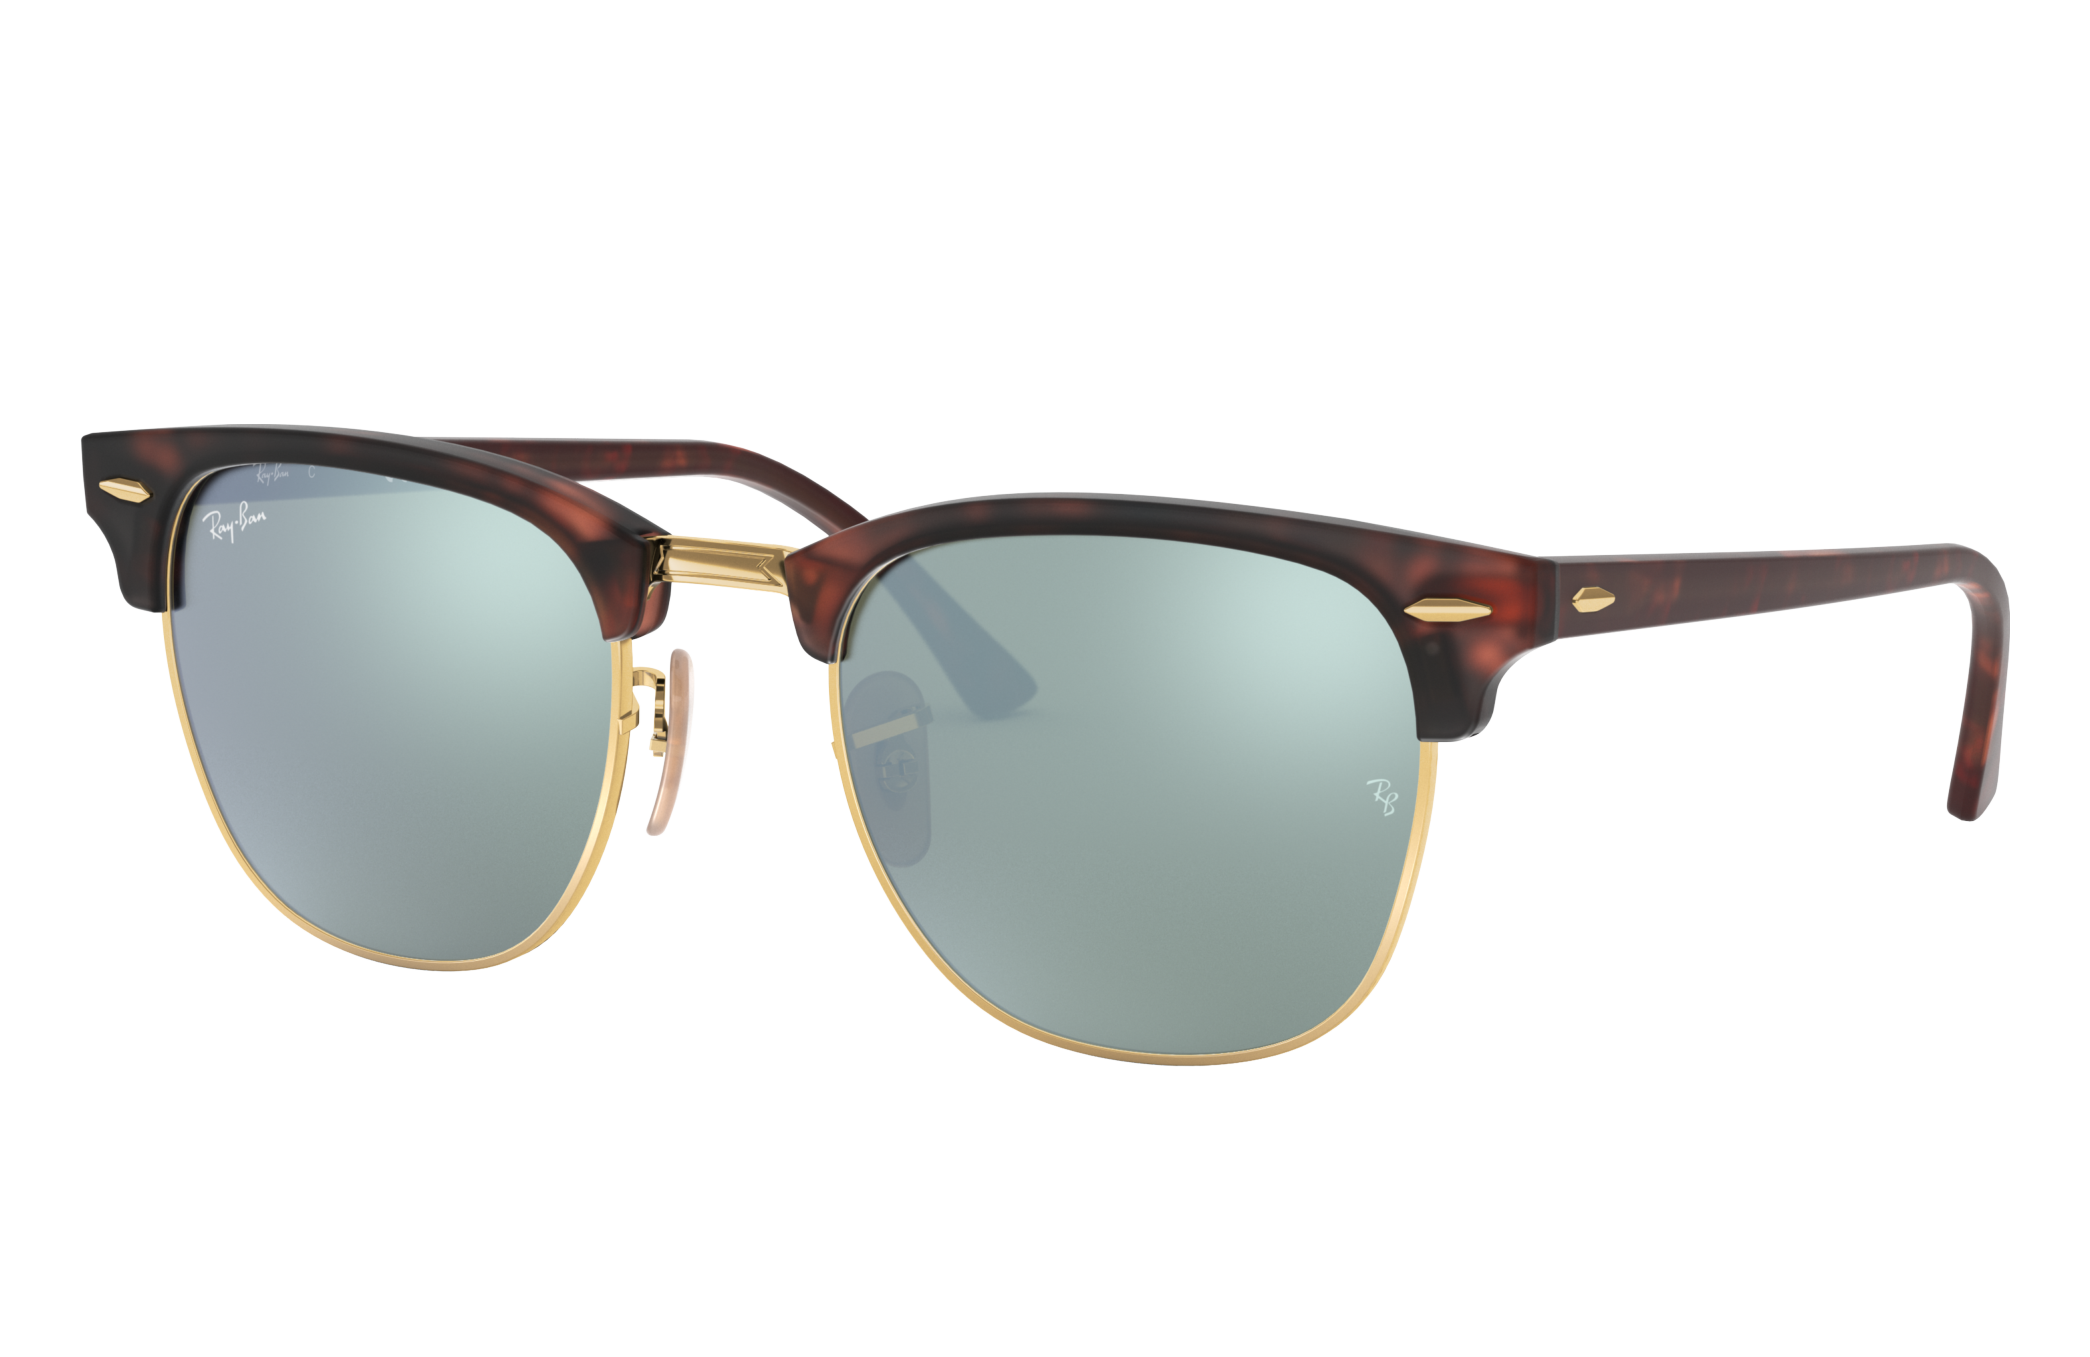 ray ban sunglasses online store